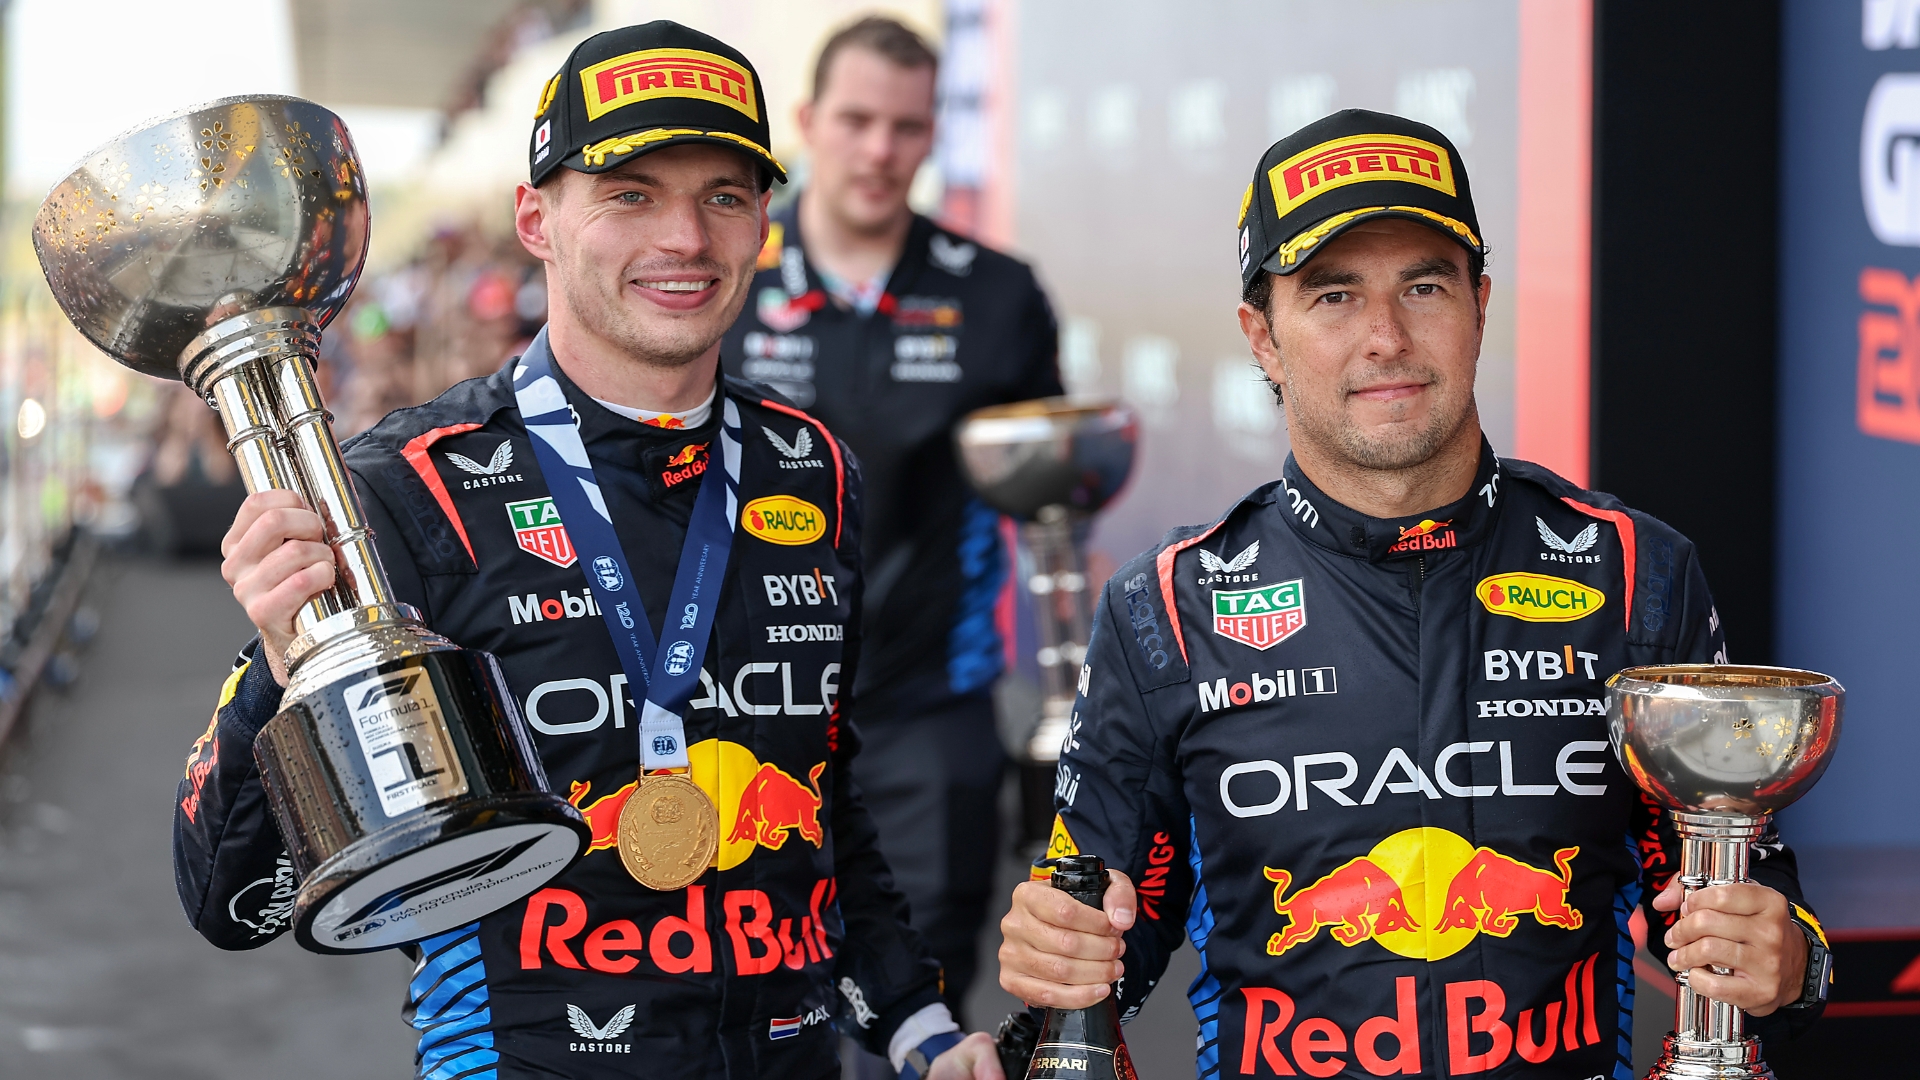 Will Red Bull continue to dominate at the Chinese Grand Prix?